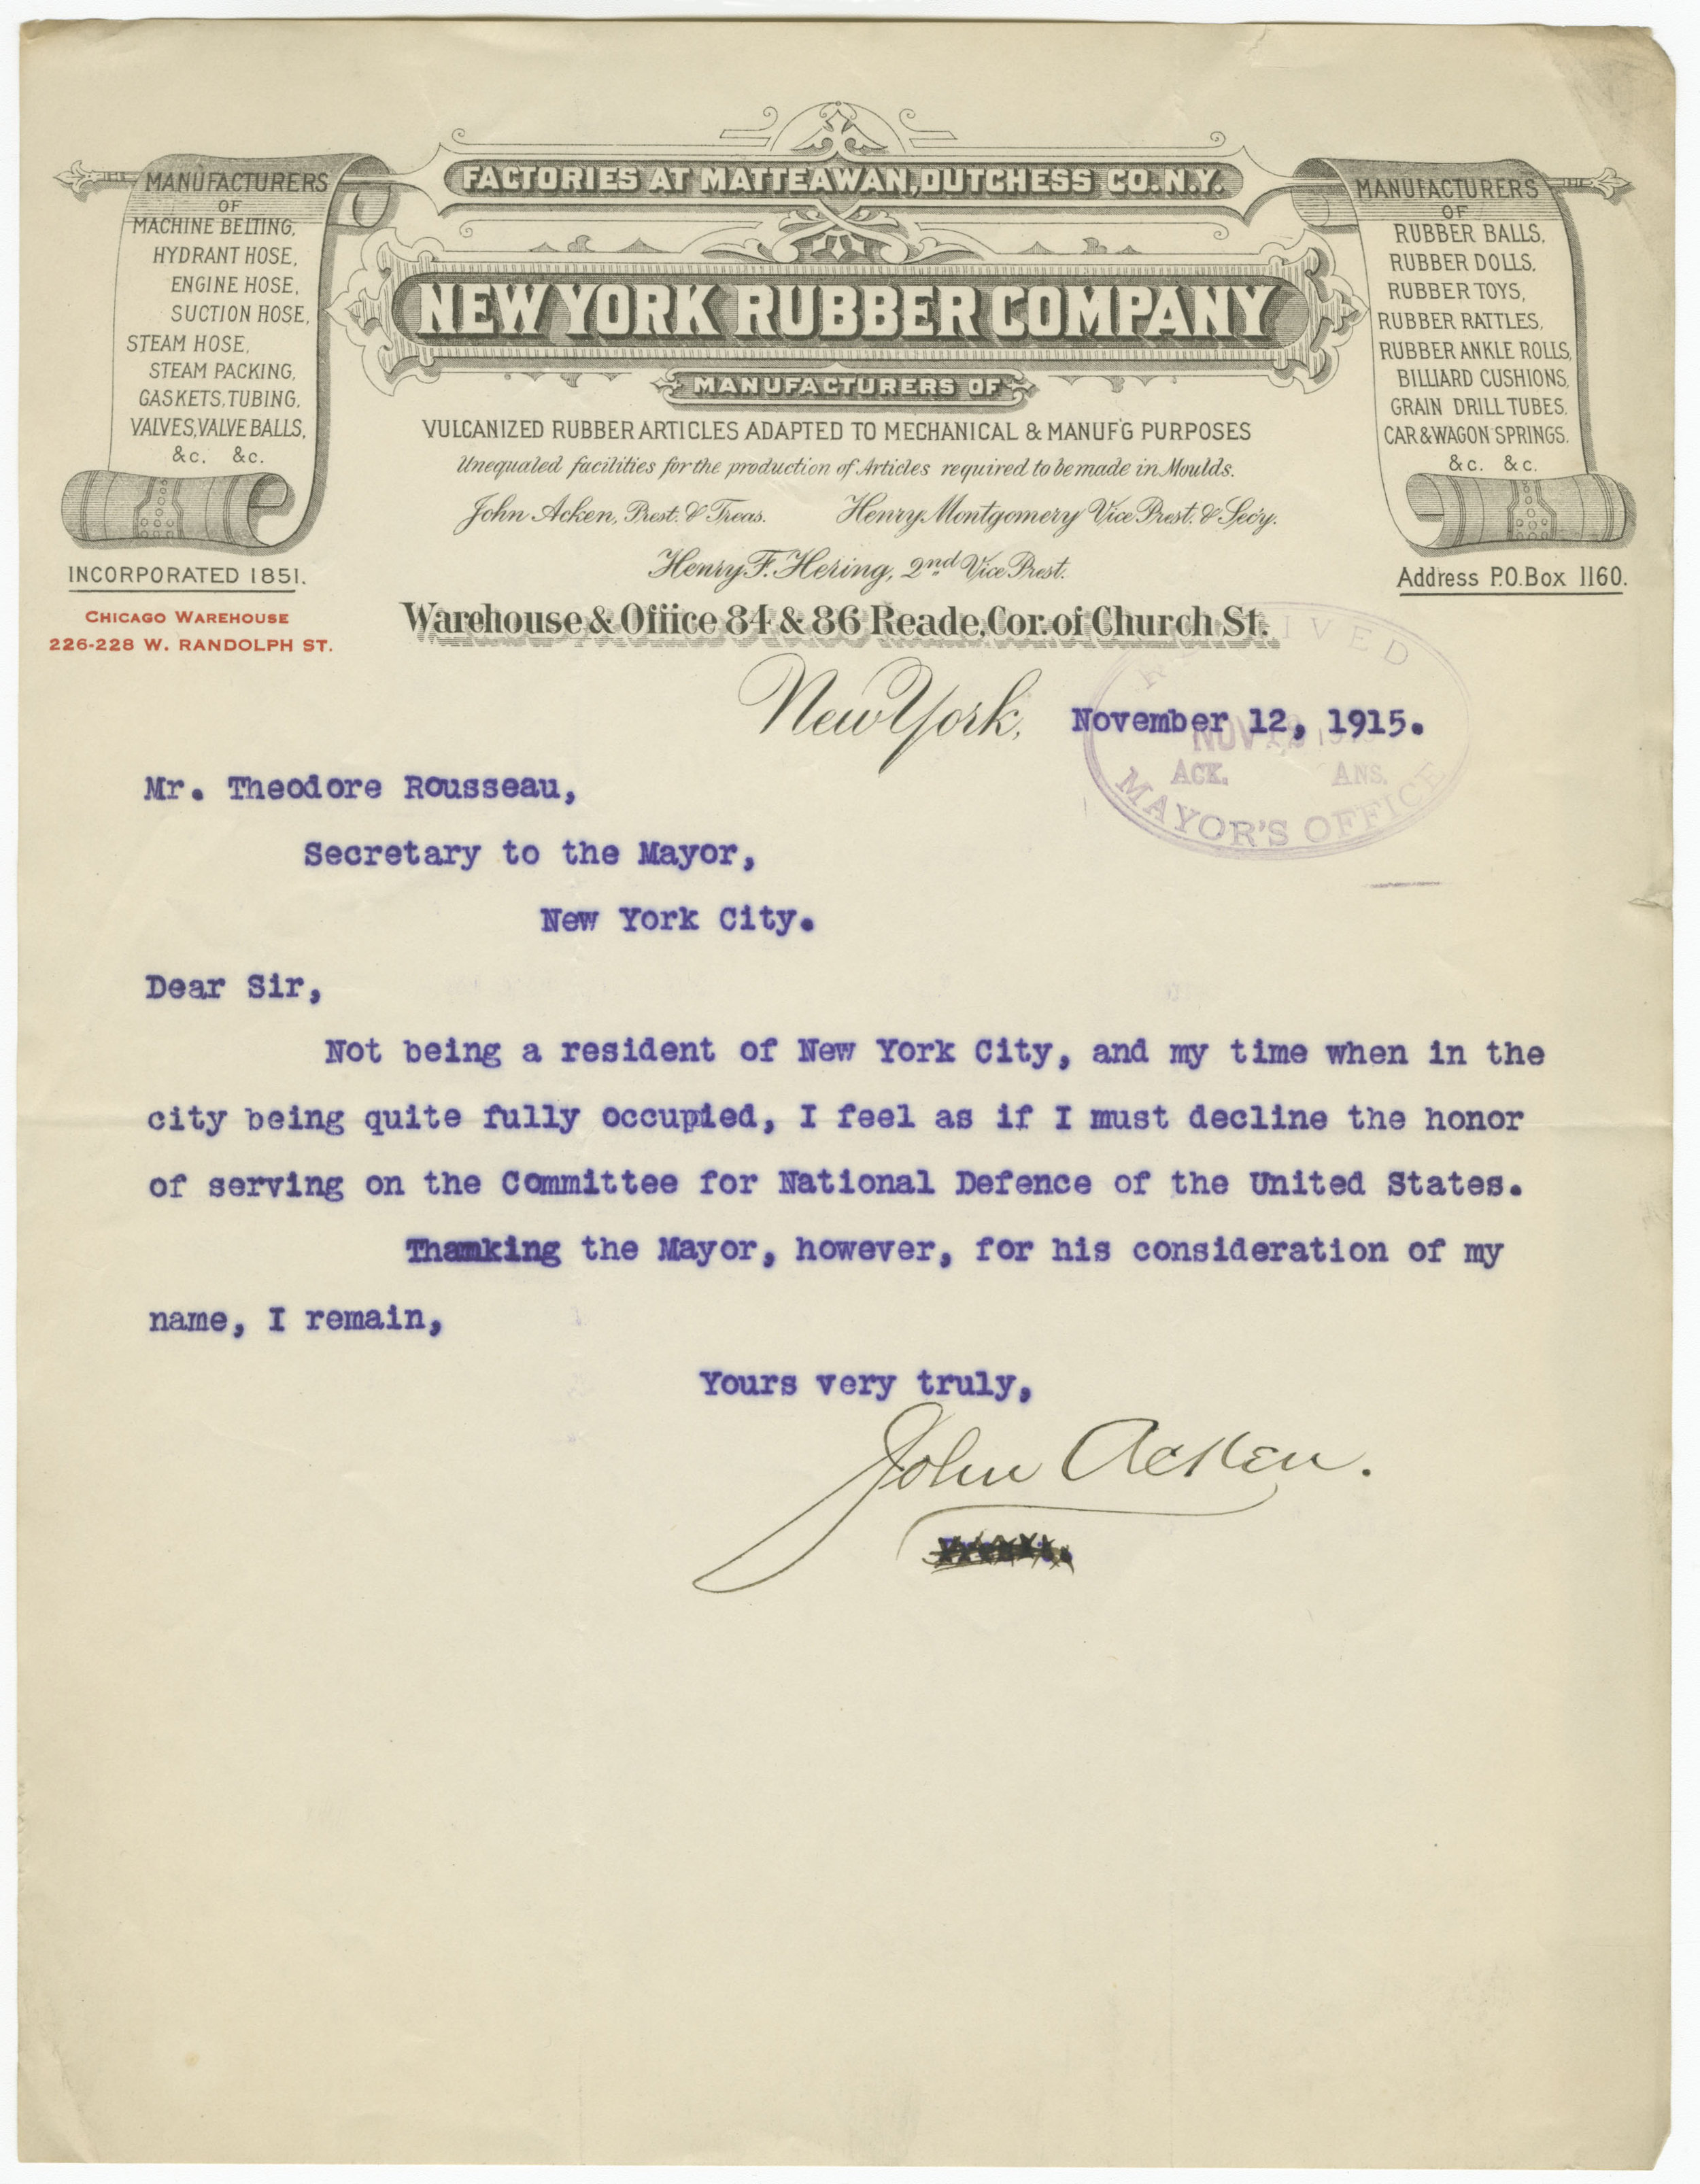 Fun with Letterheads — NYC Department of Records and Information Services